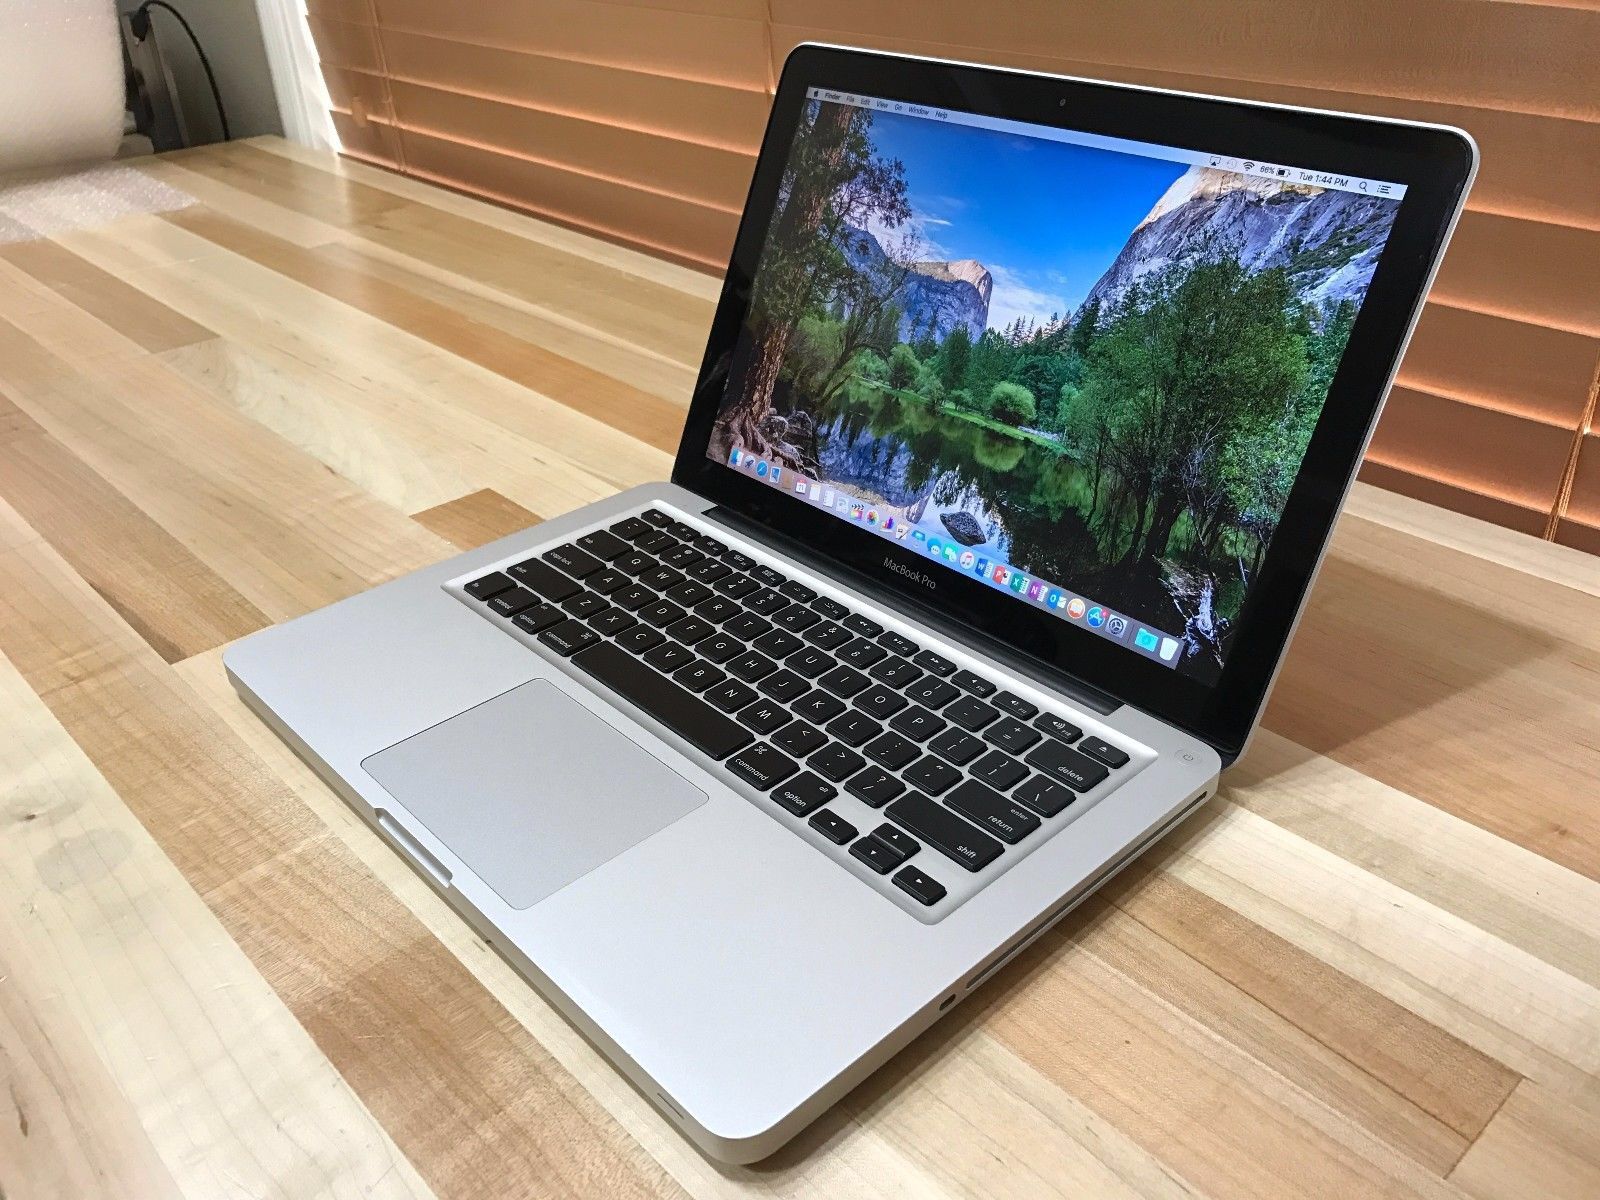 Apple Macbook Pro 13" Core i5 2.4GHz 4GB RAM 320GB HD * LIKE NEW MACBOOK PRO ! Perfect working and physical condition! No marks, scratches, nothing